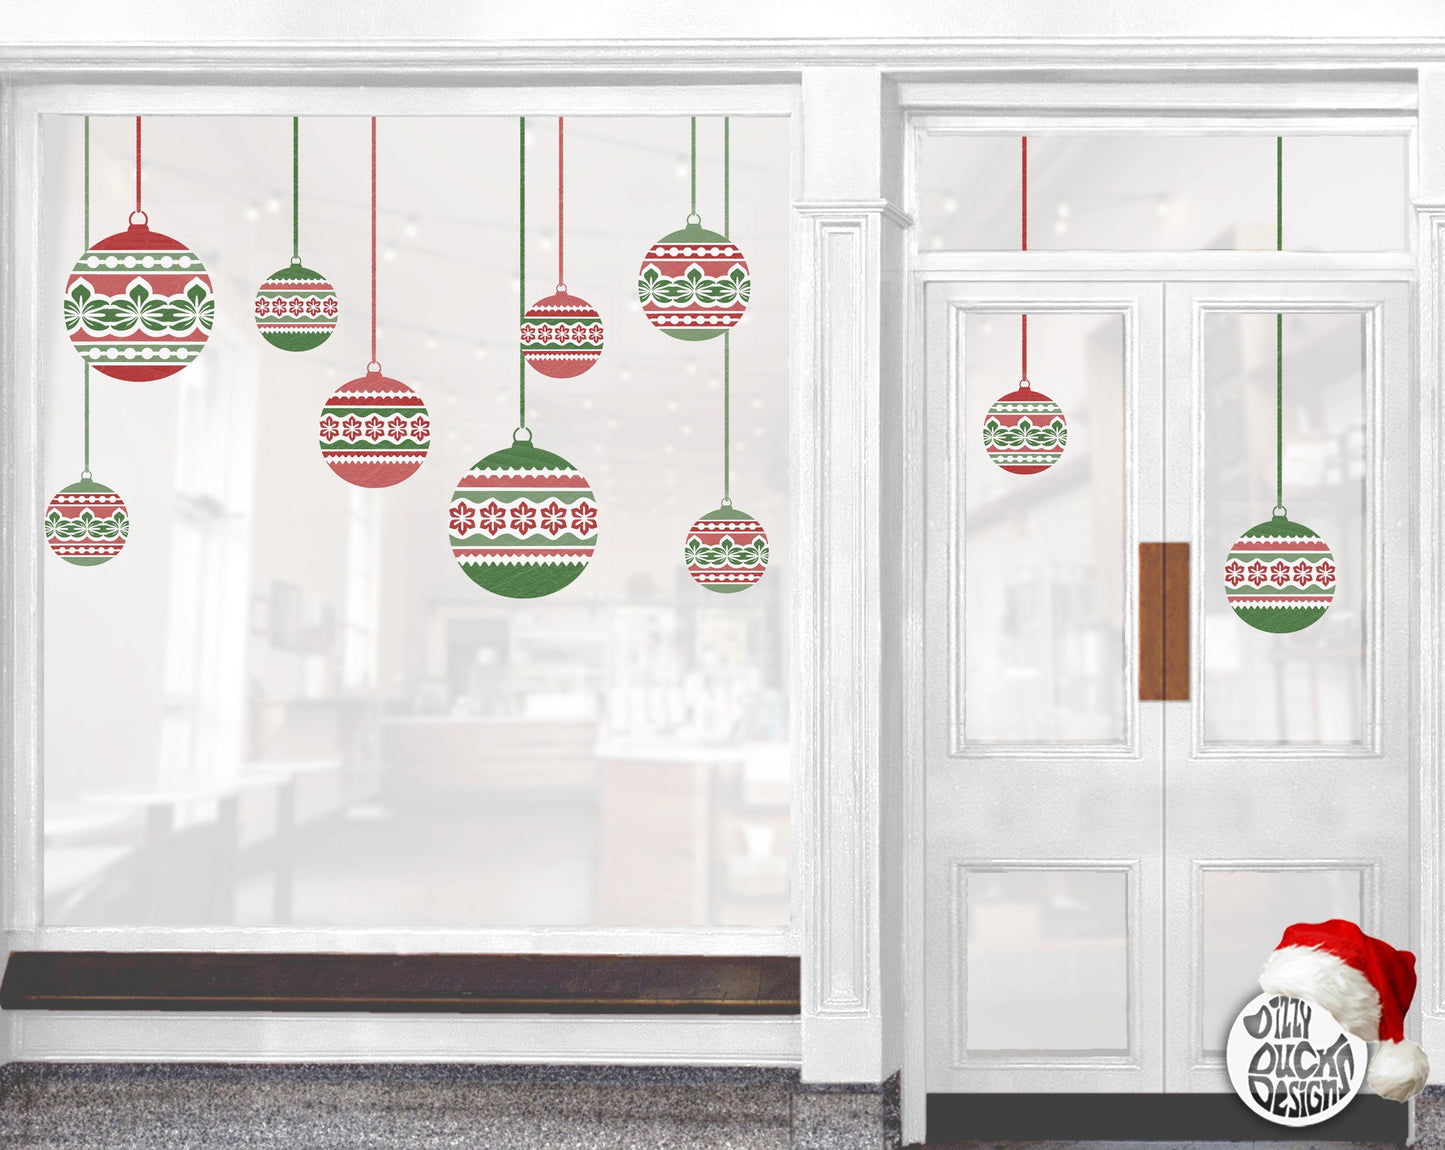 Decal 10 Nordic Christmas Bauble Shop Window Decals - Red/Green Dizzy Duck Designs